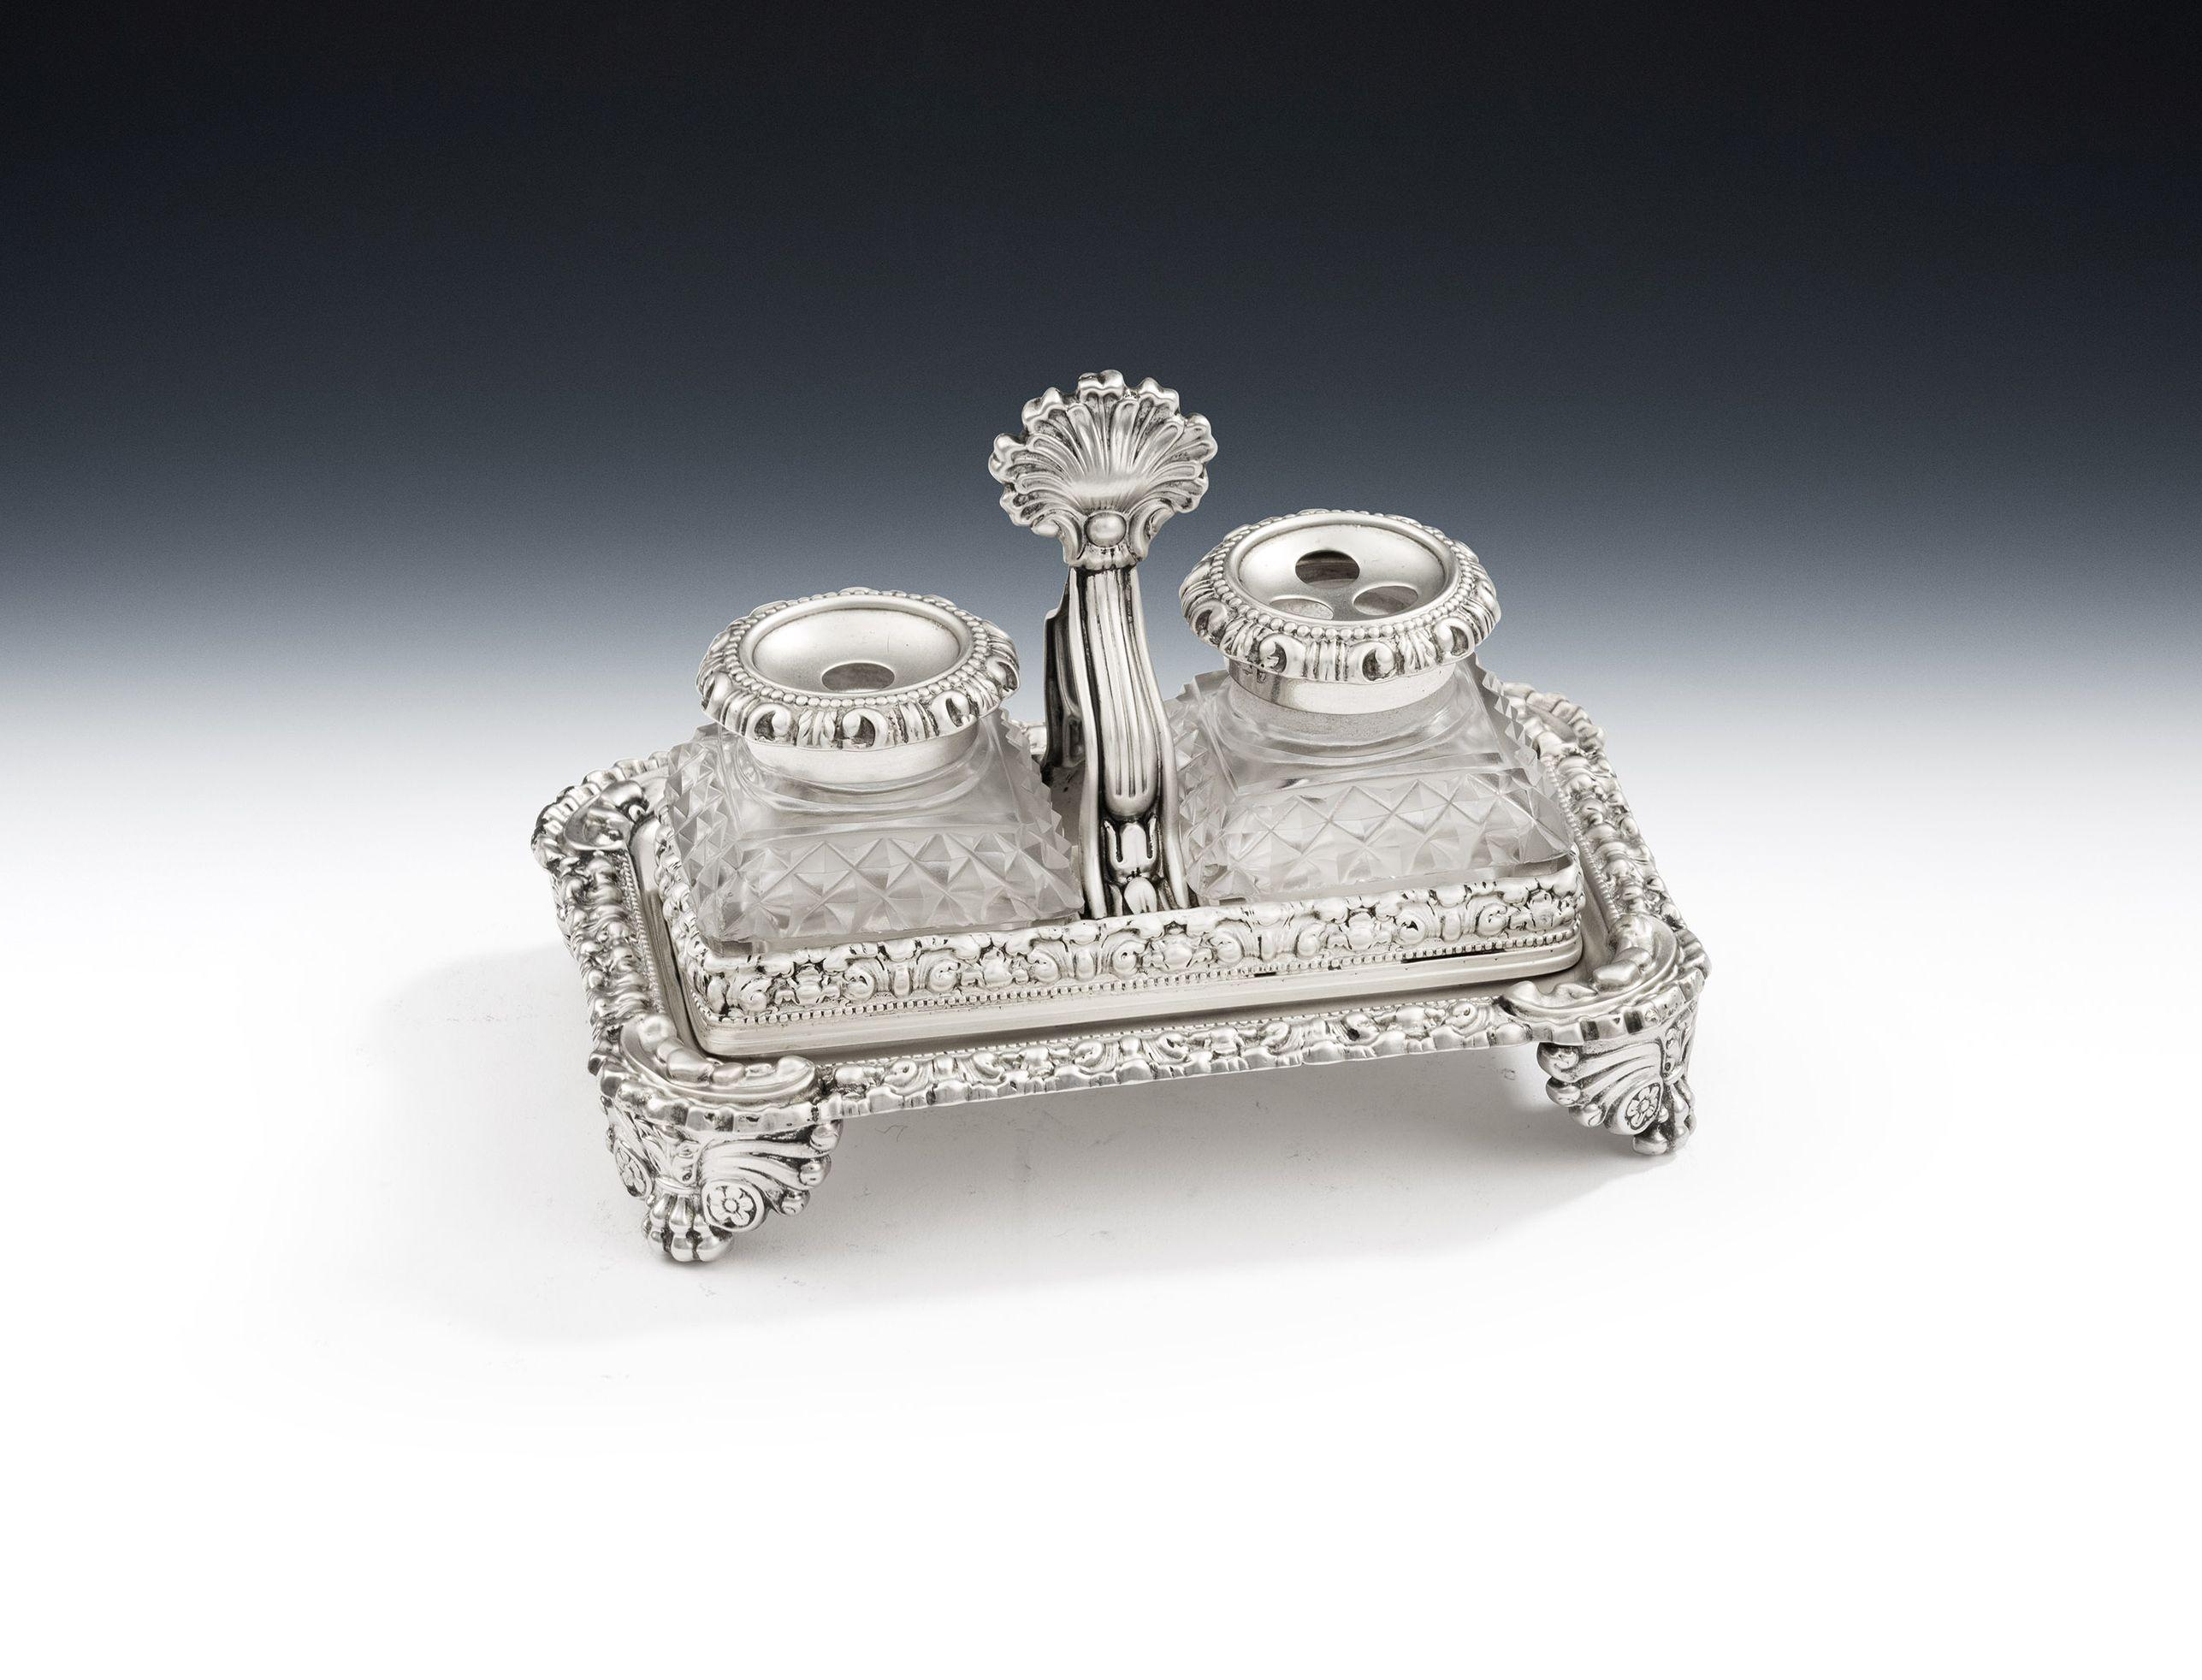 In the manner of Paul Storr. A very rare George IV Bachelor Inkstand made in Sheffield in 1822 by Thomas & James Settle.

This exceptionally rare Inkstand is modelled in the bachelor size and is modelled in the manner of Paul Storr's designs. As you